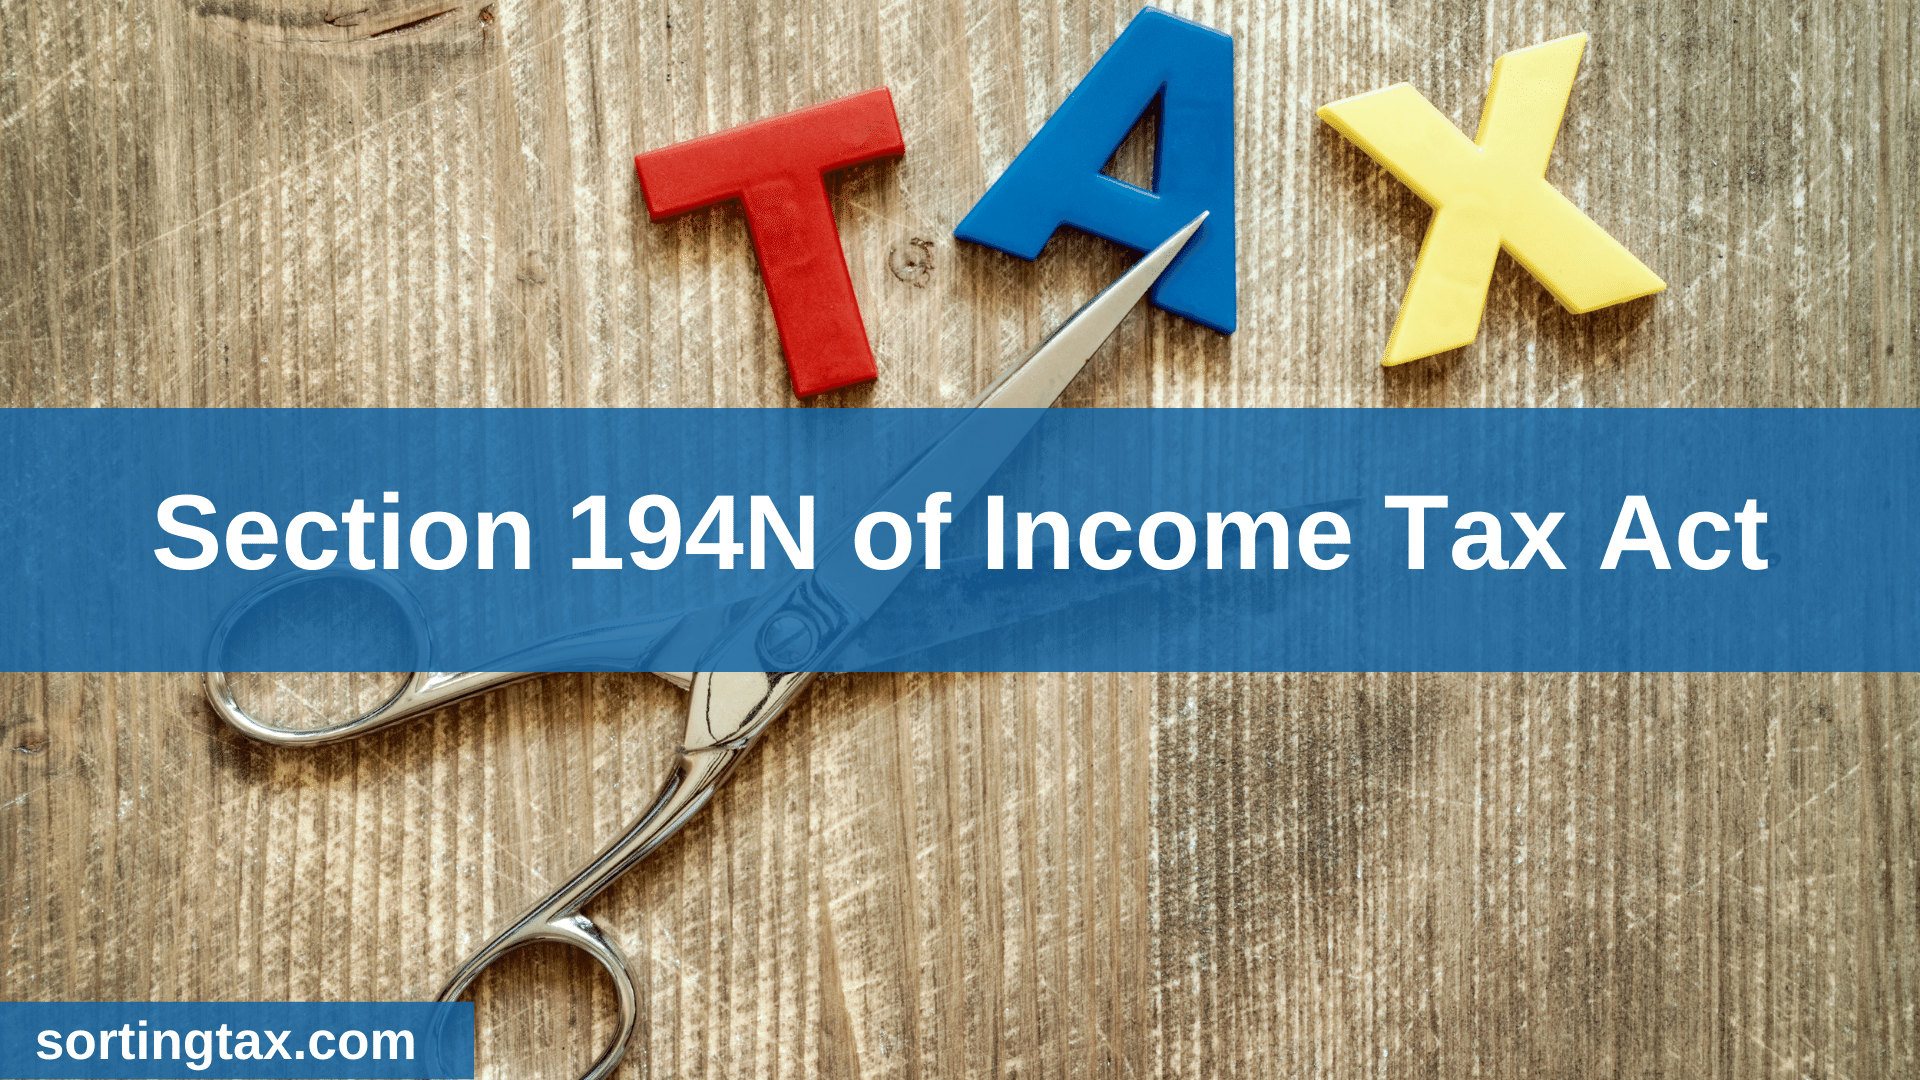 Section 194N of Income Tax Act